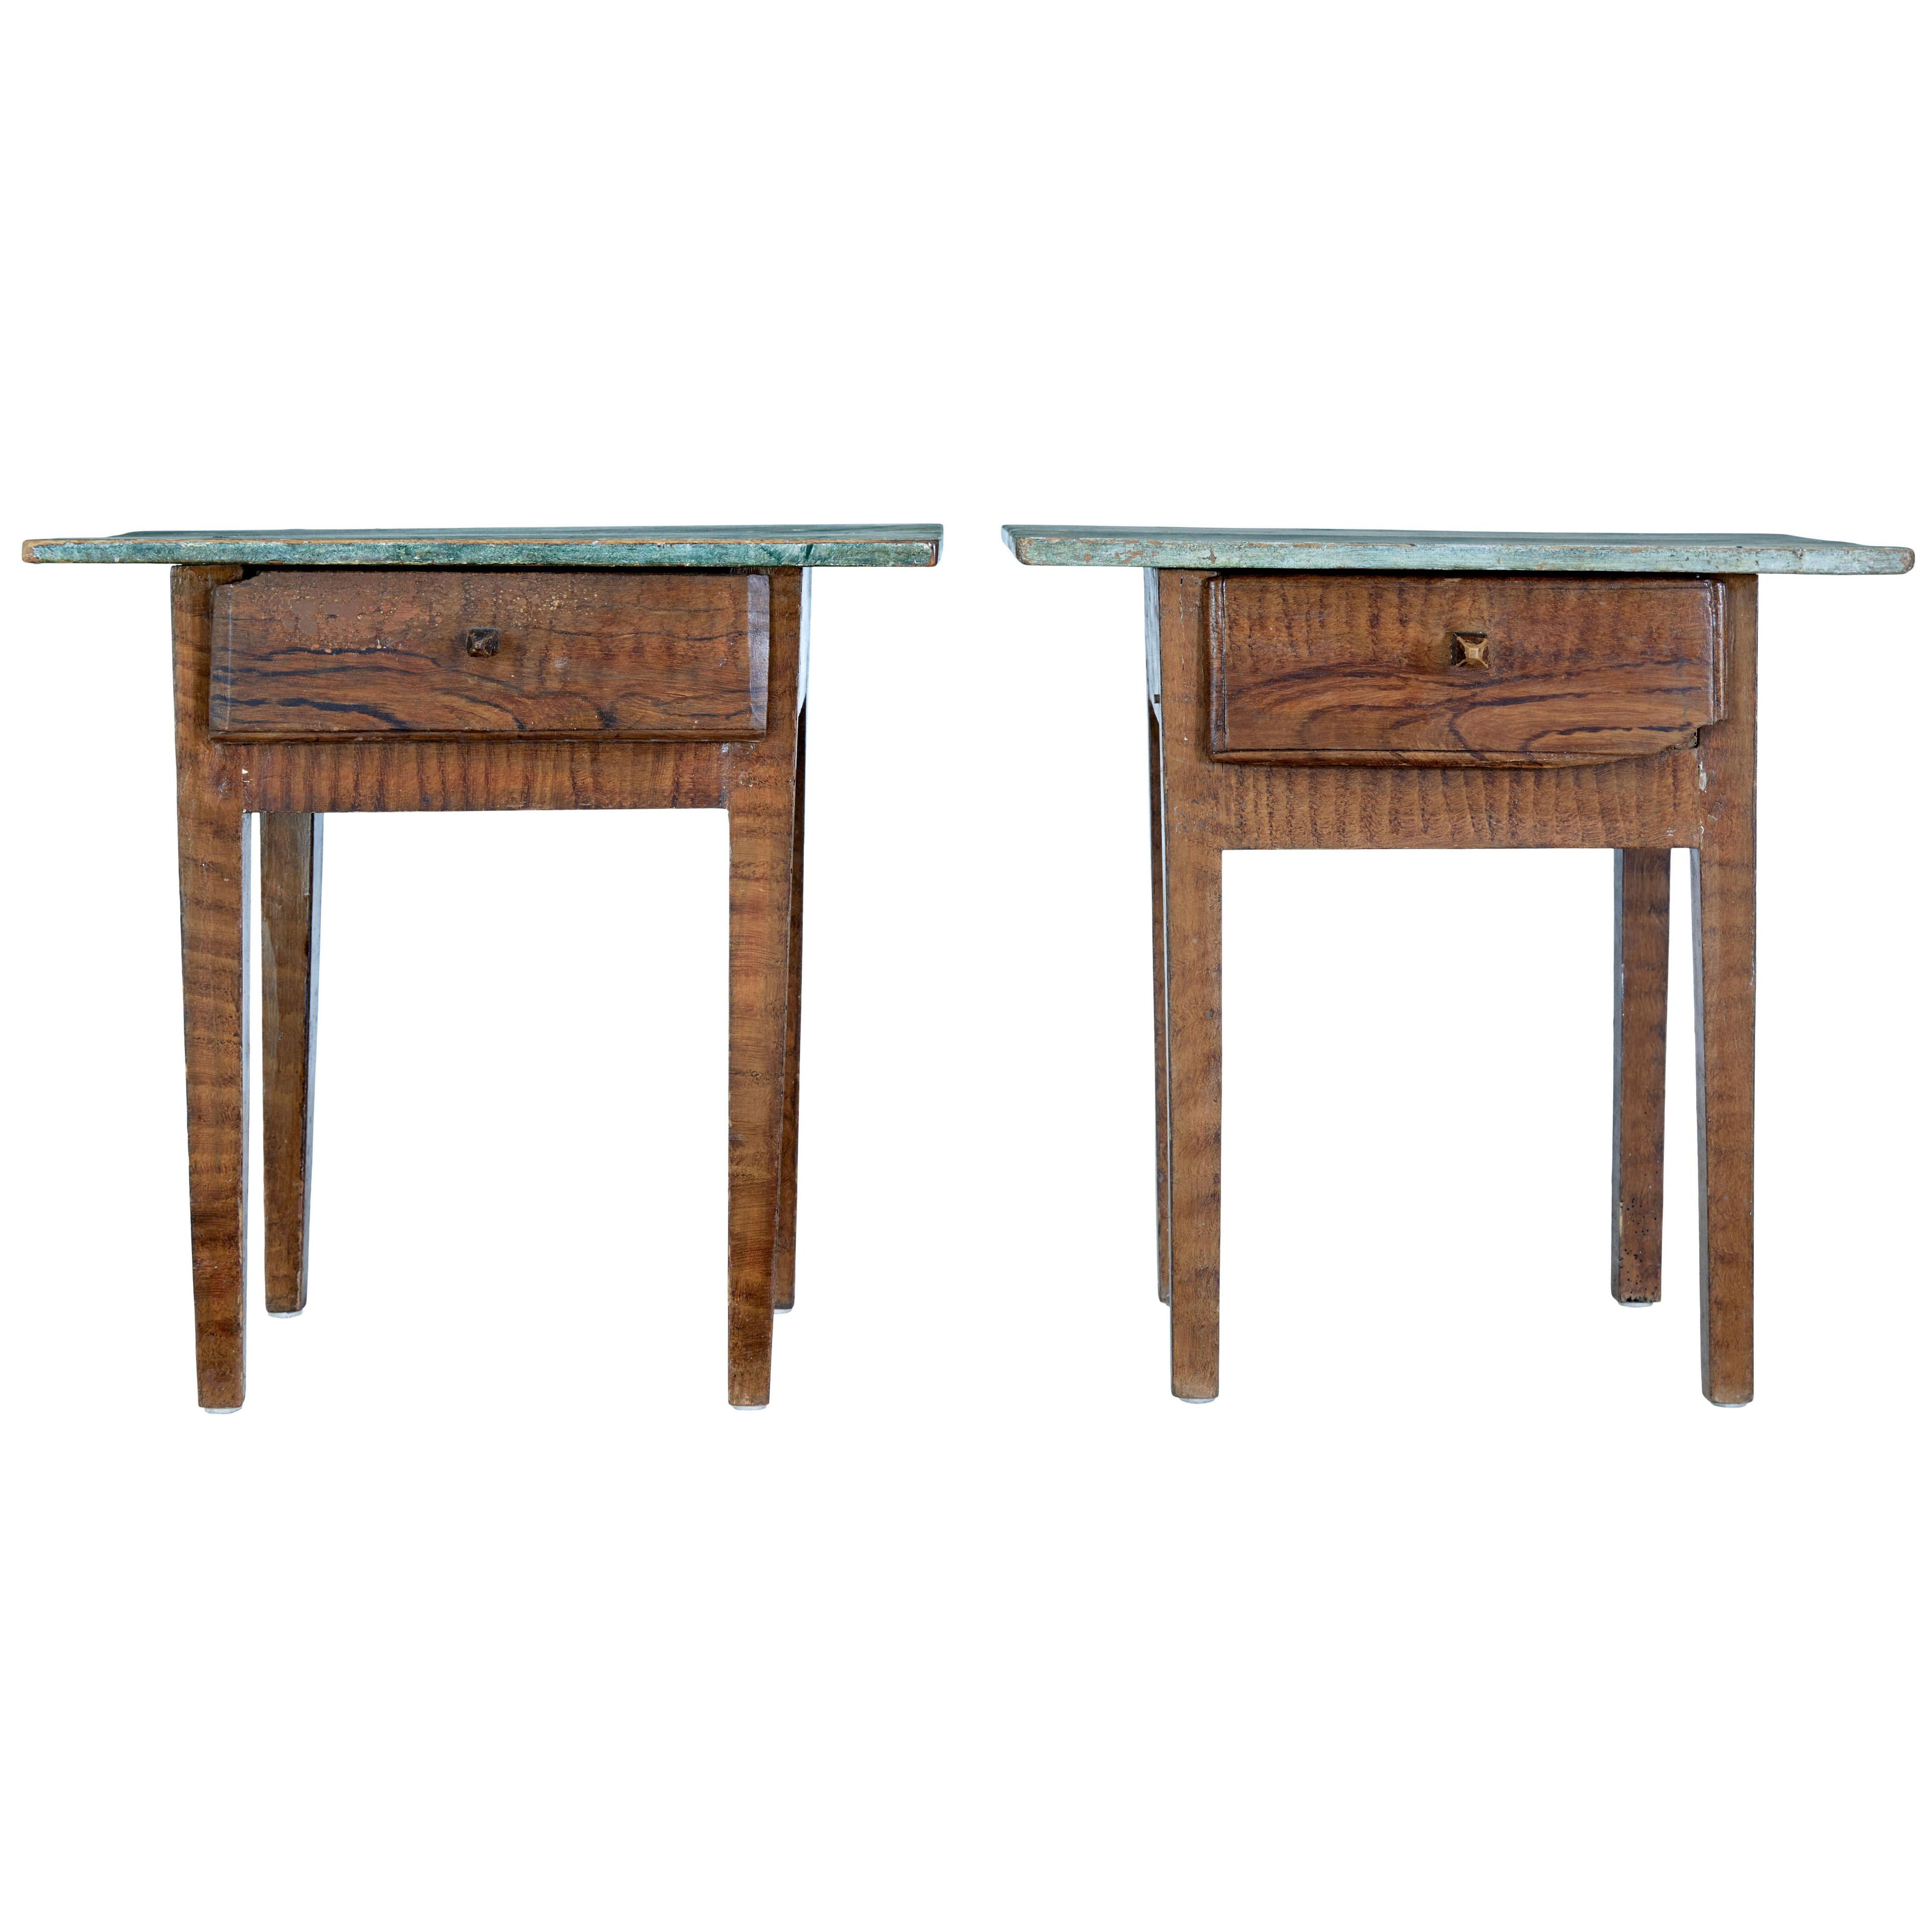 PAIR OF TRADITIONAL PAINTED SWEDISH SIDE TABLES